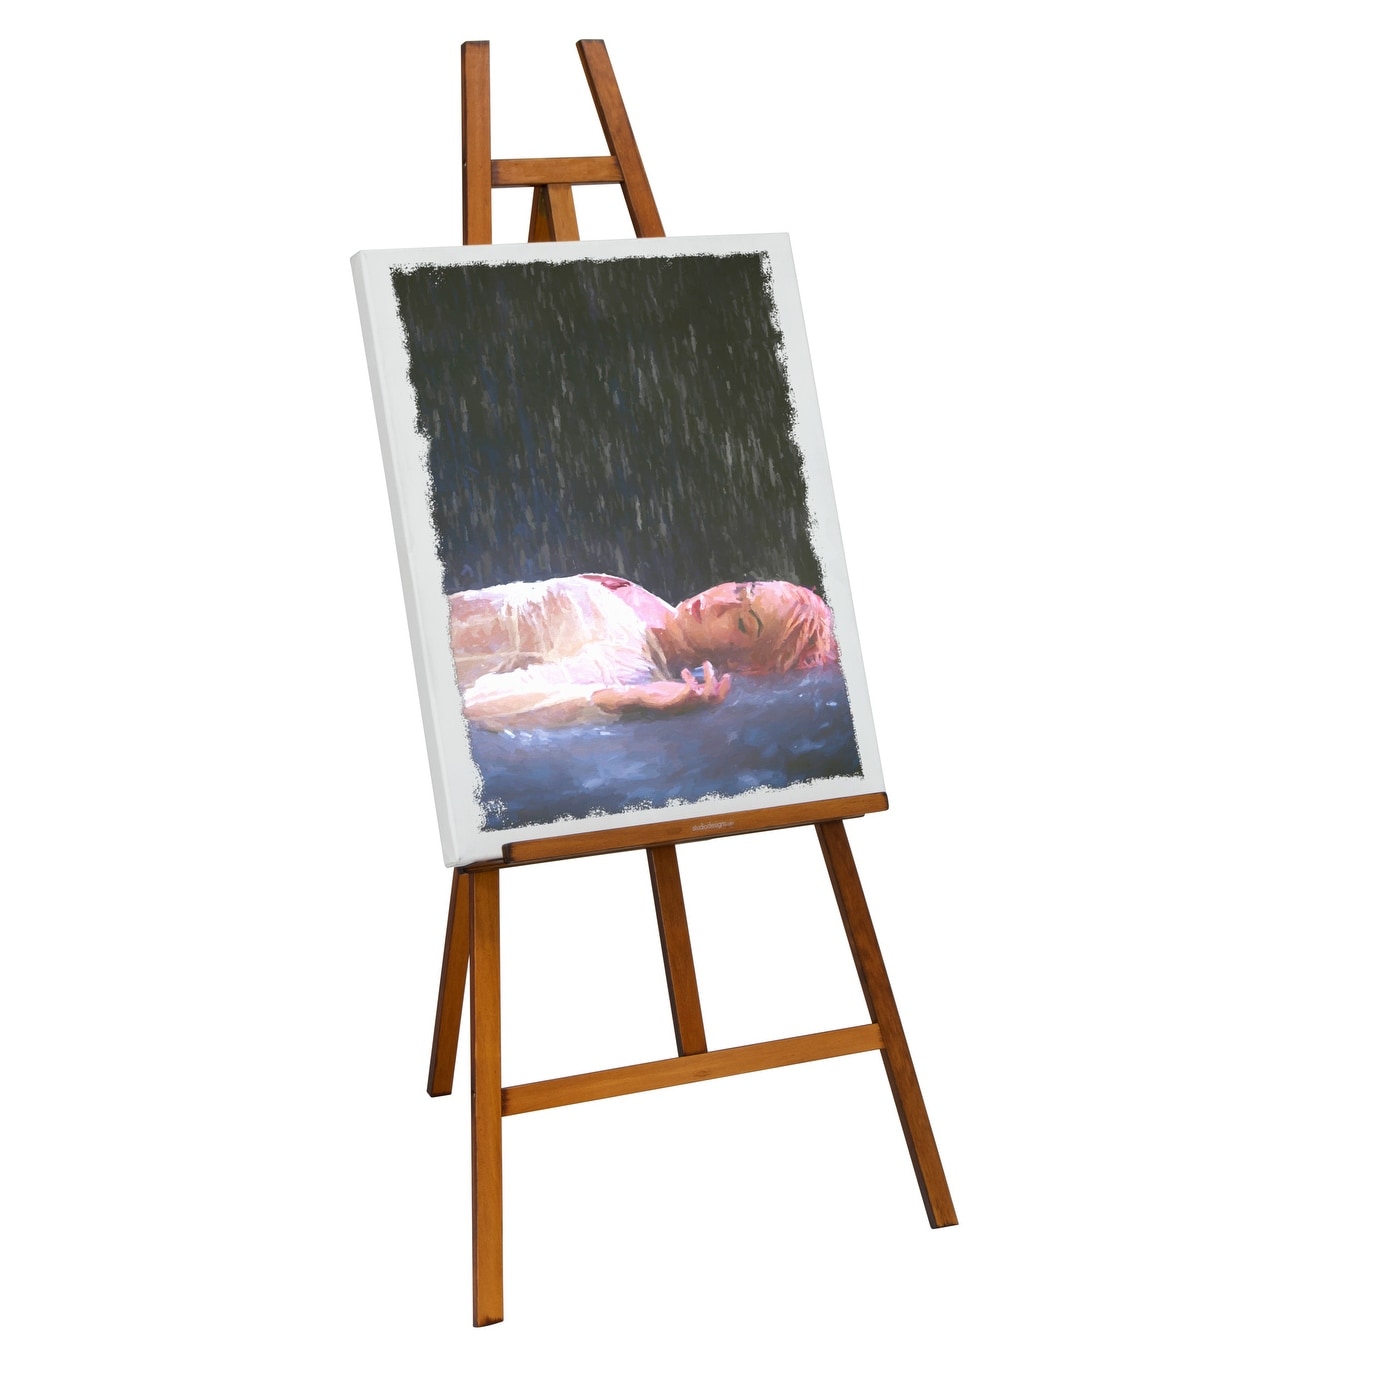 Heavy-Duty Metal, Museum Display Art Tripod Easel for Large Canvases (68  H) - Black